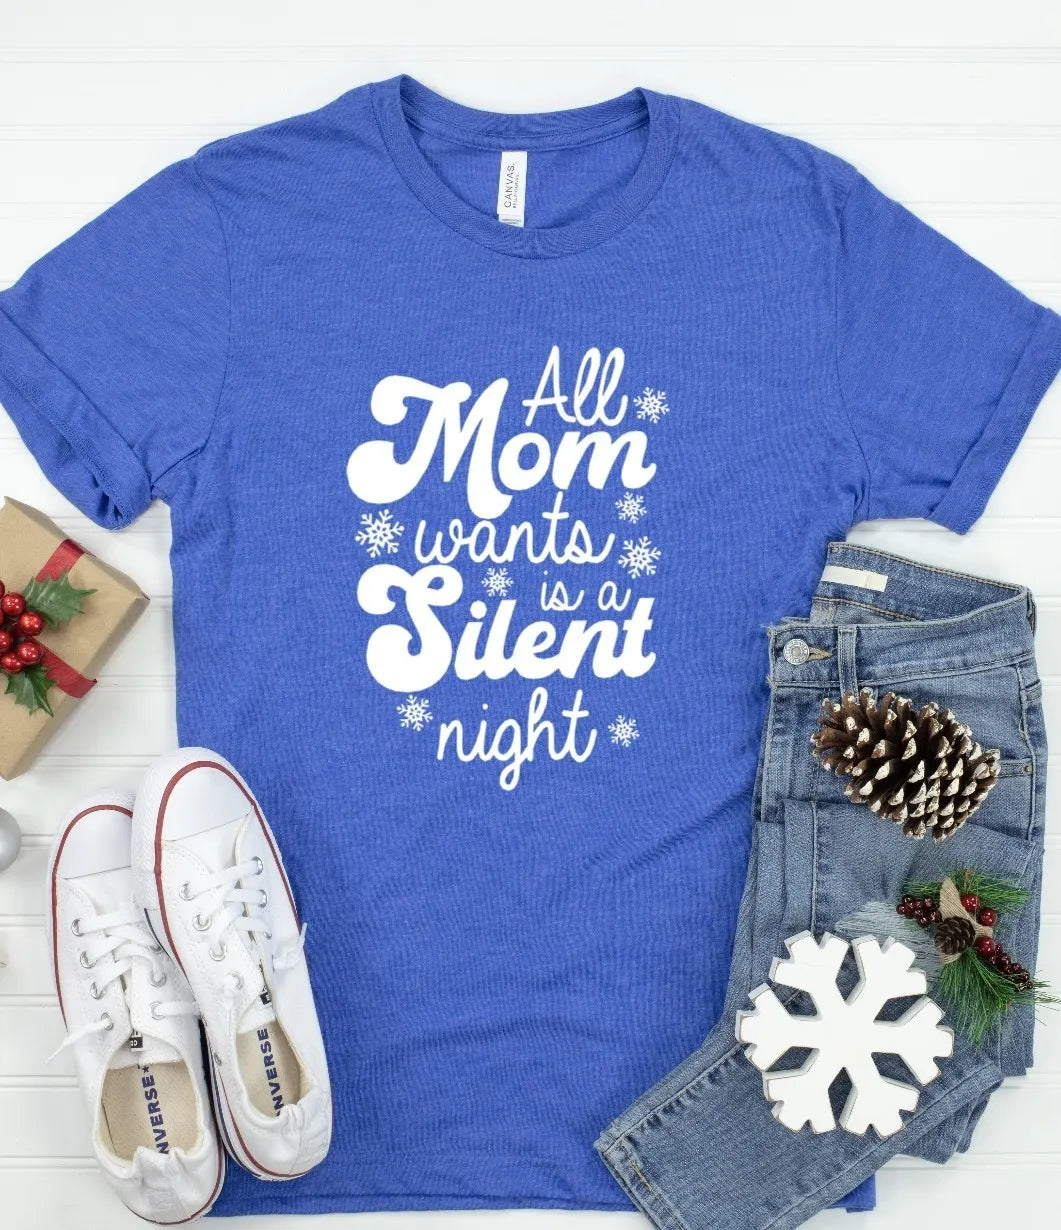 All Mom Wants is a Silent Night Tee